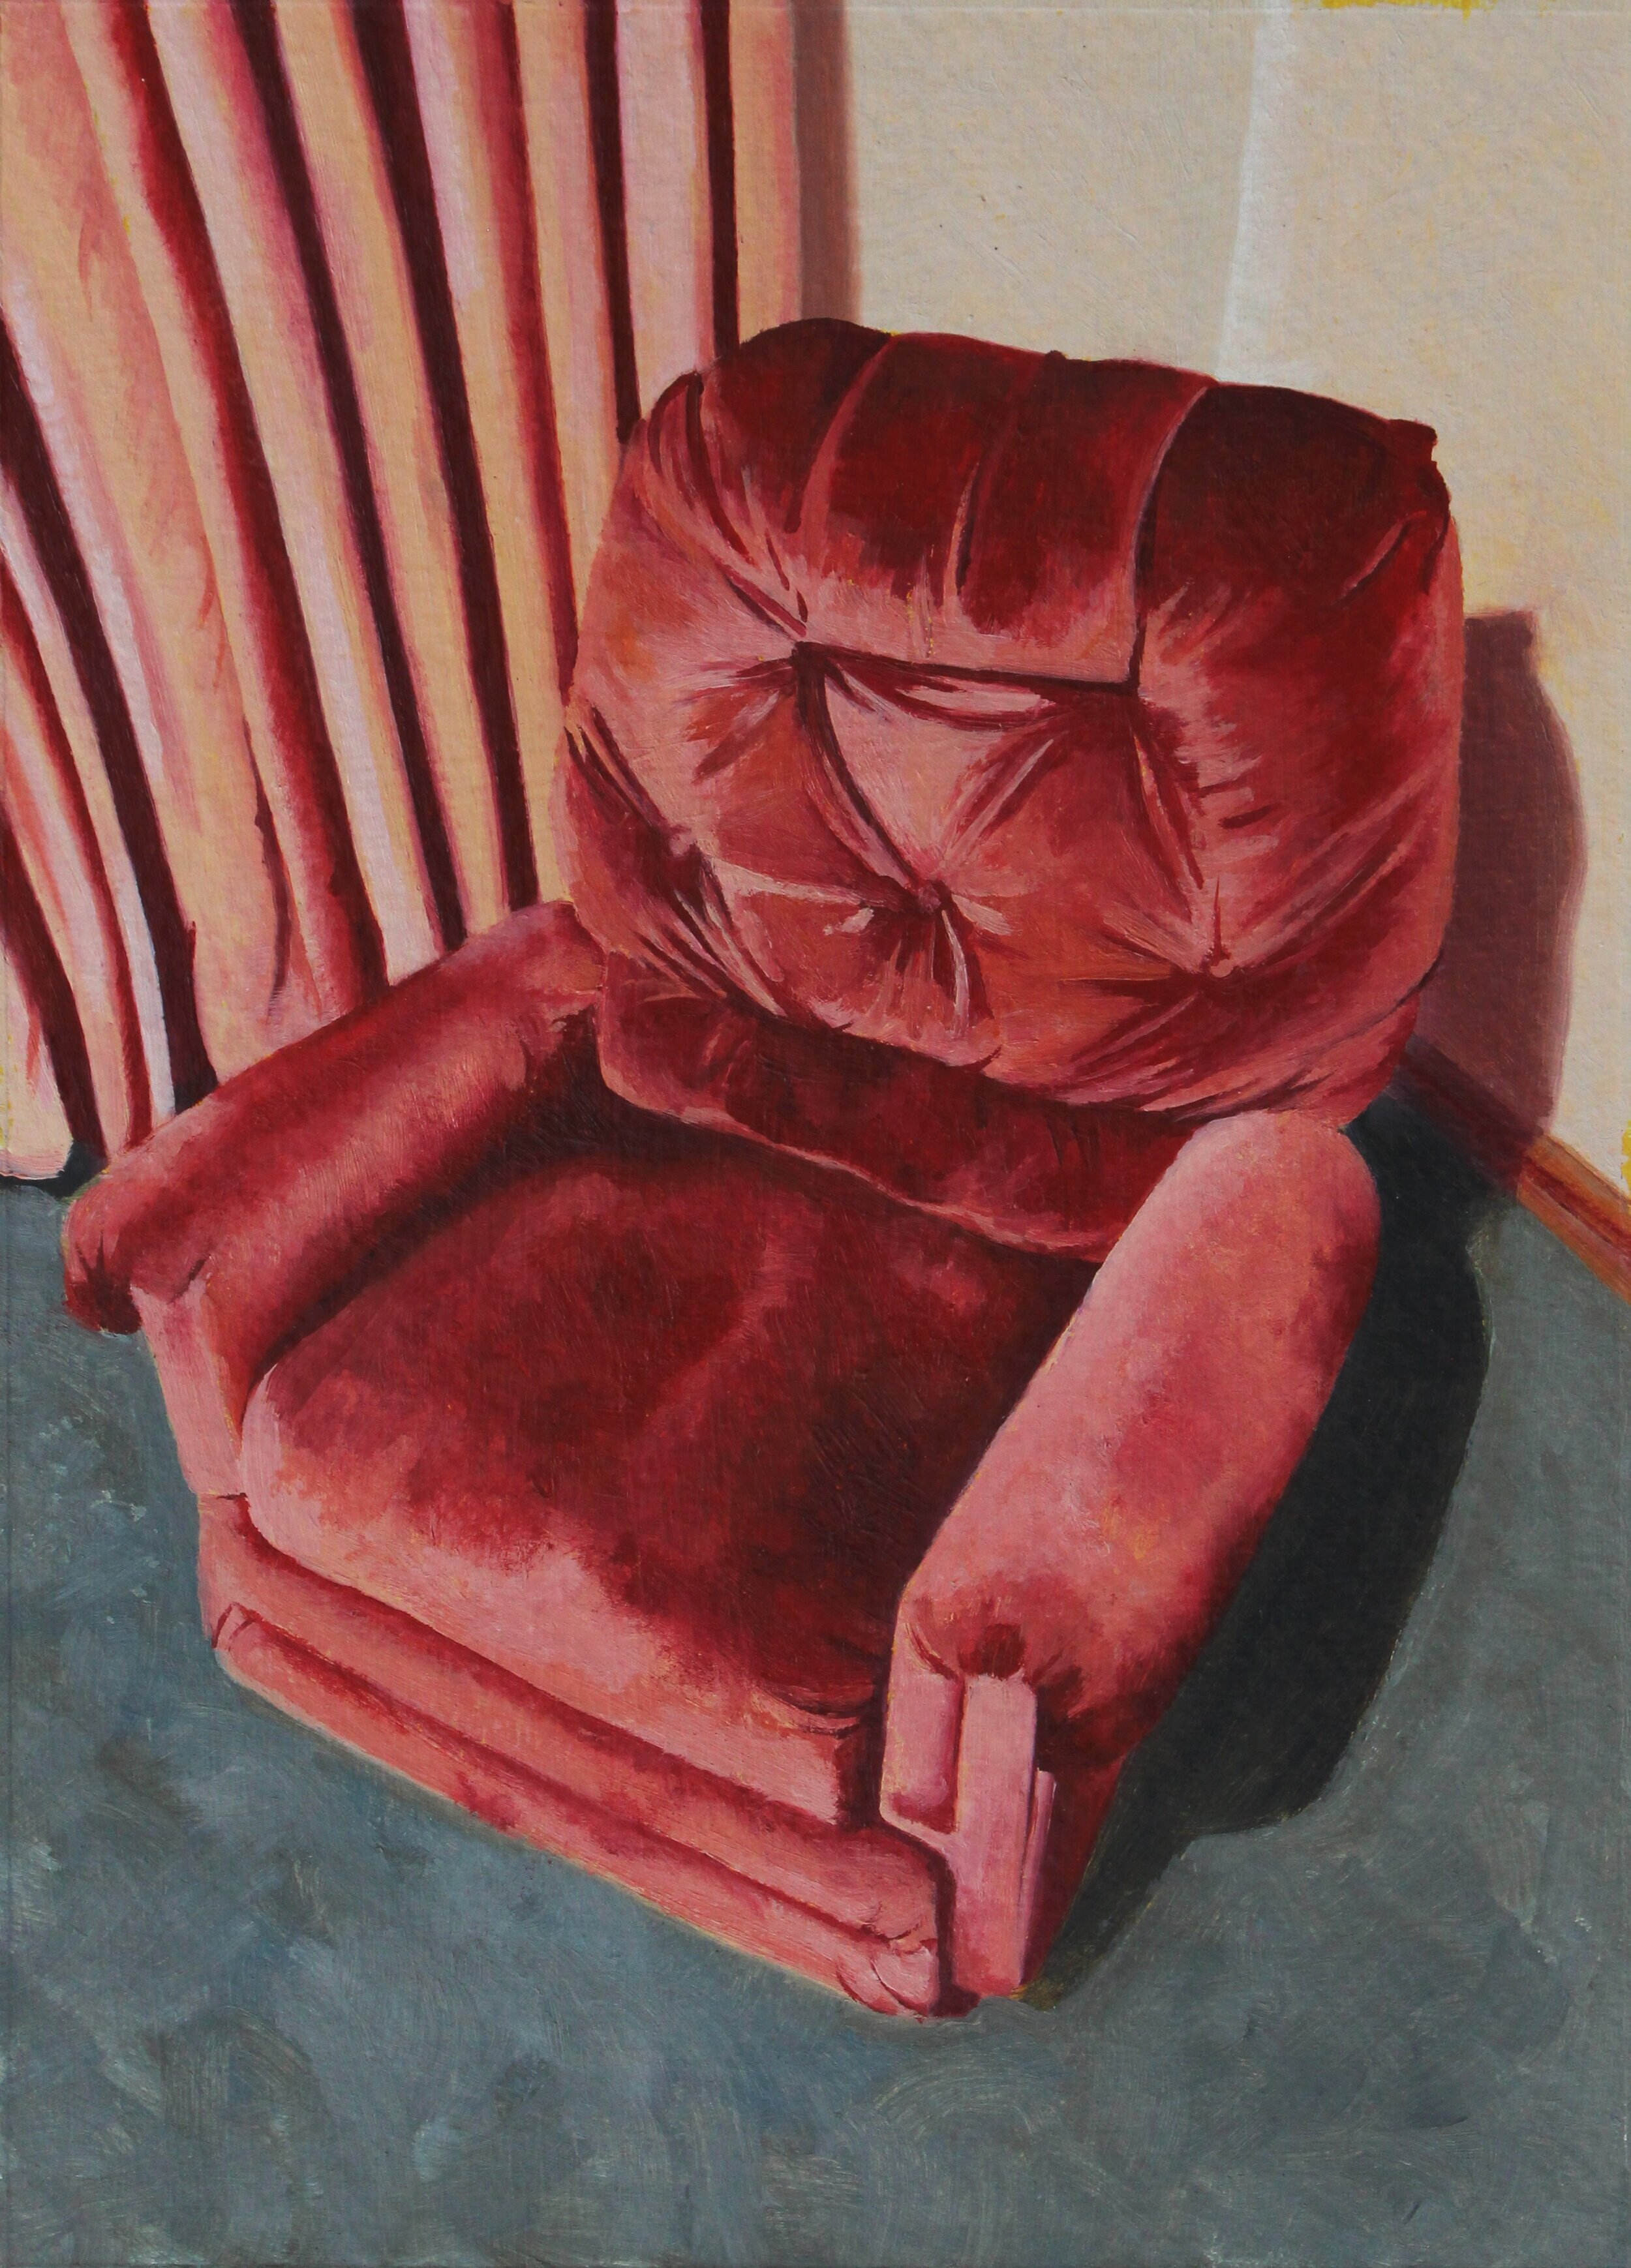  Chair 13, 2020  oil on paper  5.5 x 7.5 in 